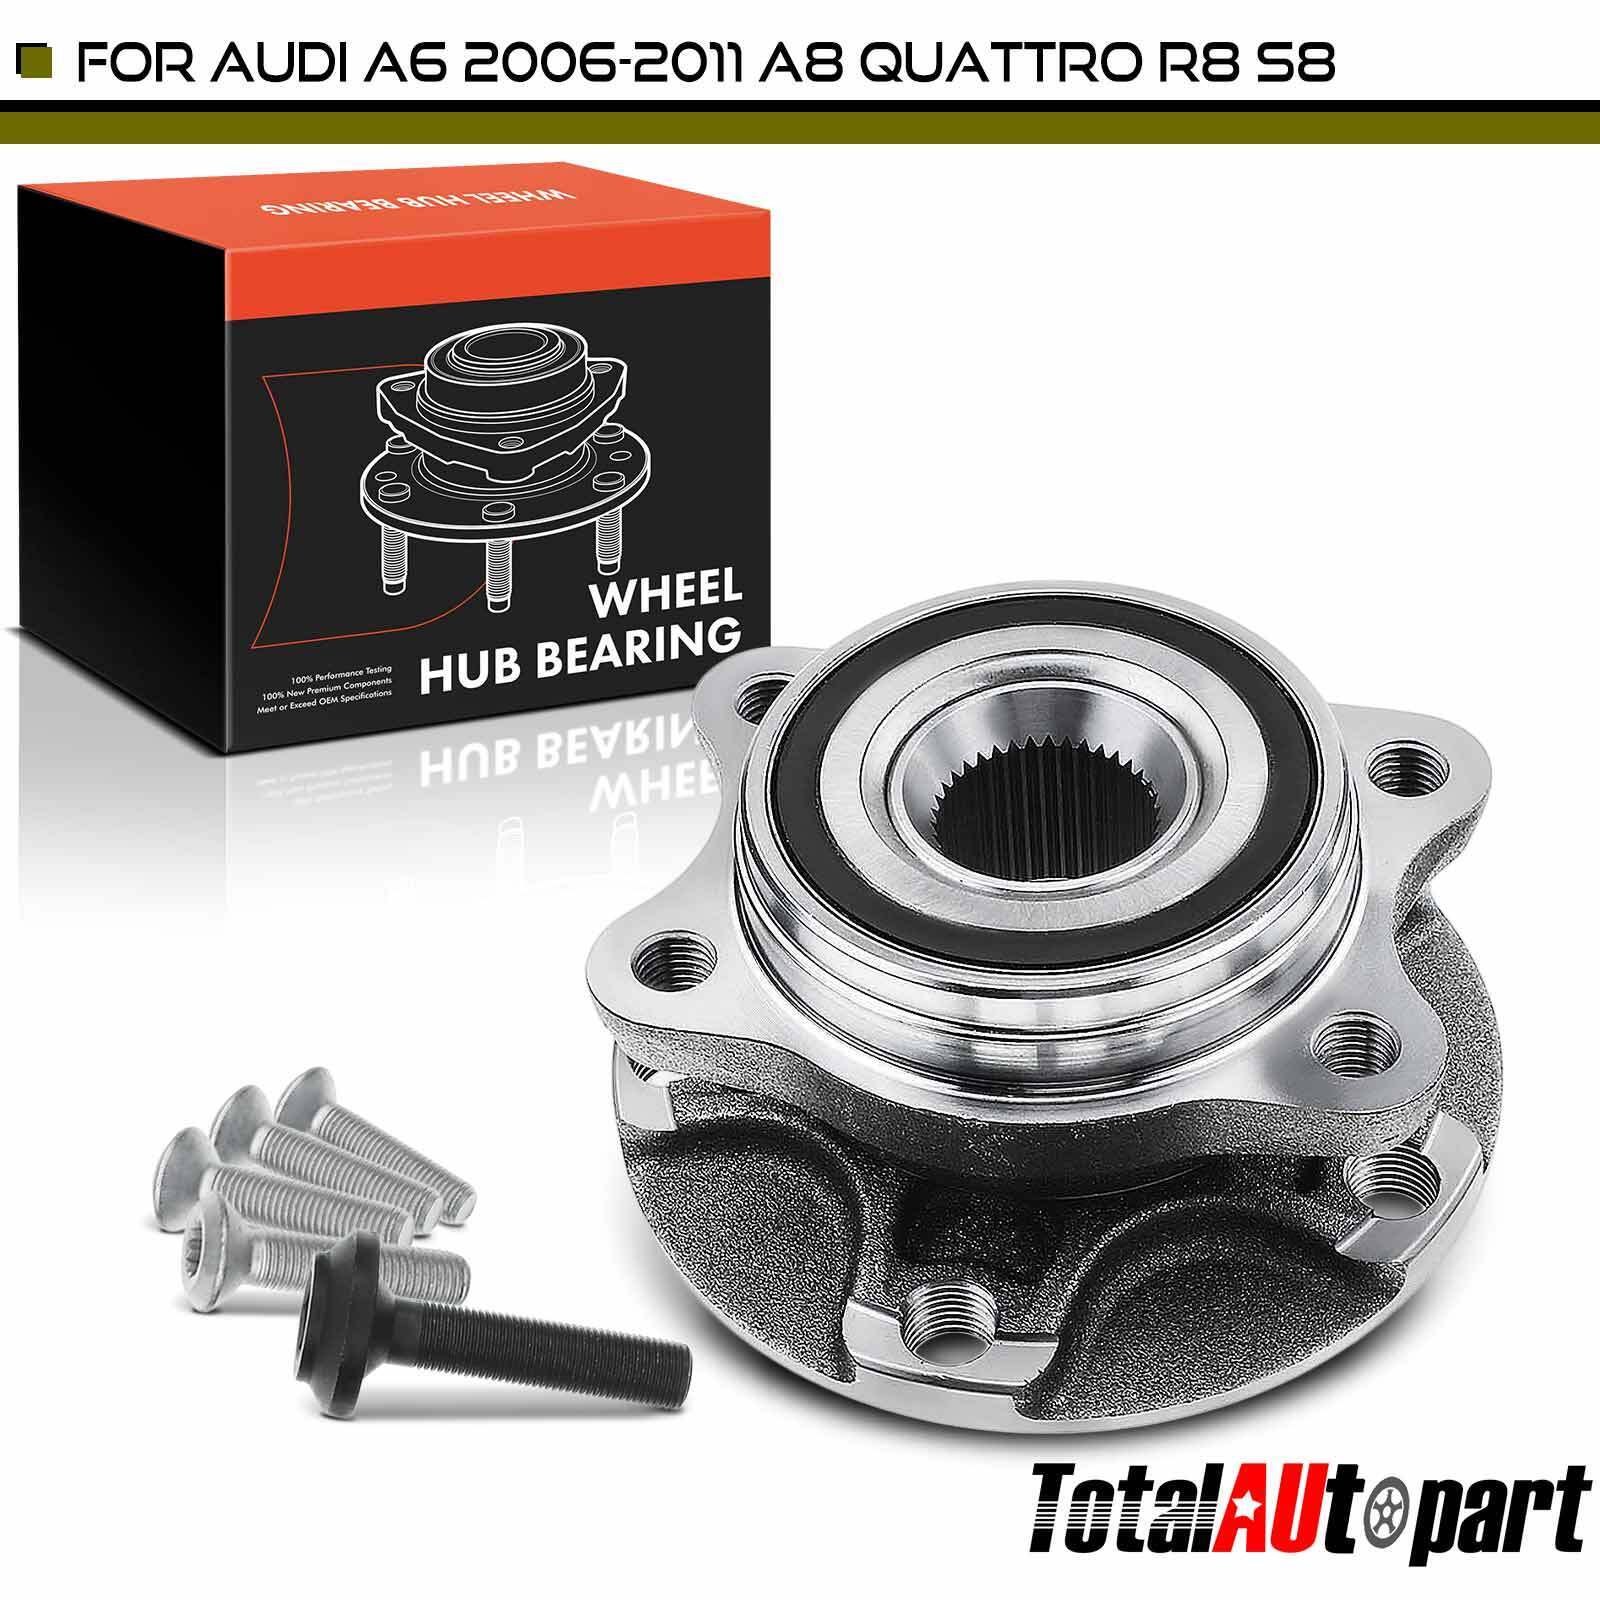 Wheel Hub Bearing Assembly for Audi A6 Quattro 05-11 A8 Quattro R8 Left or Right